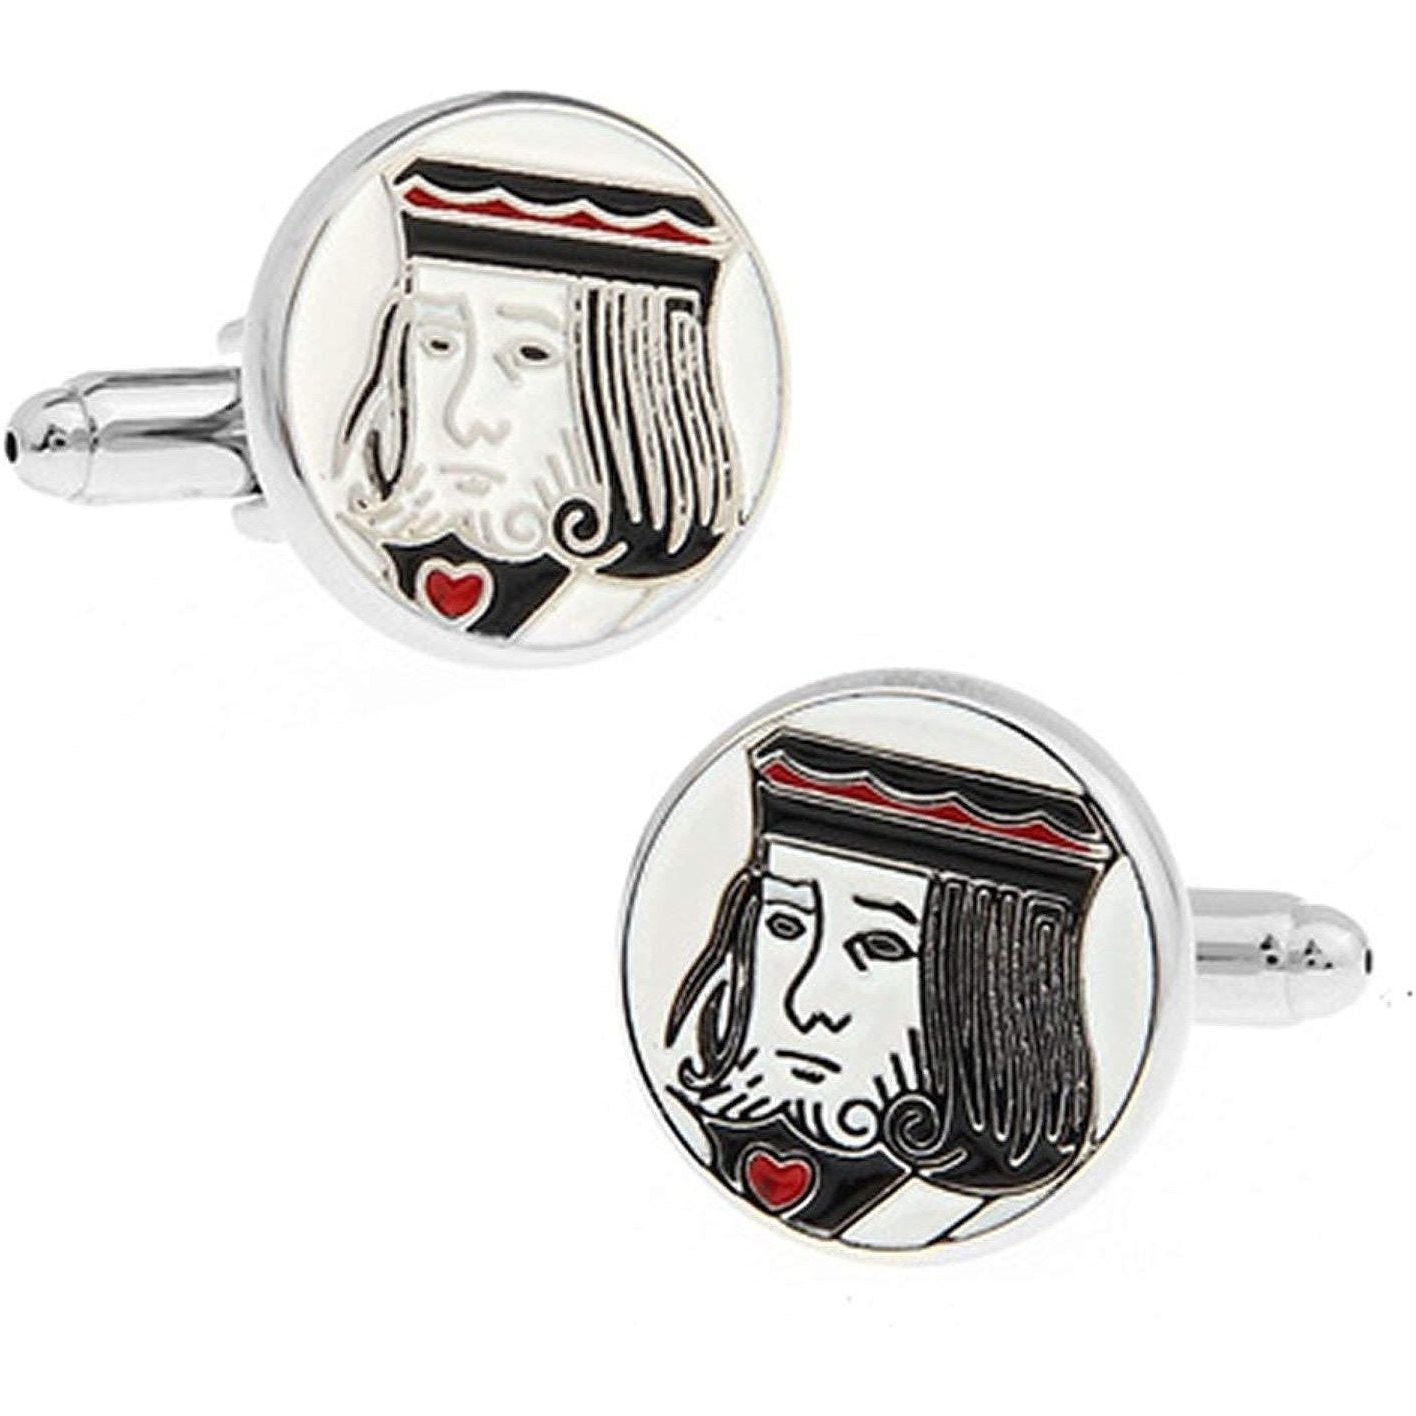 King of Hearts Cufflinks - Ashton and Finch